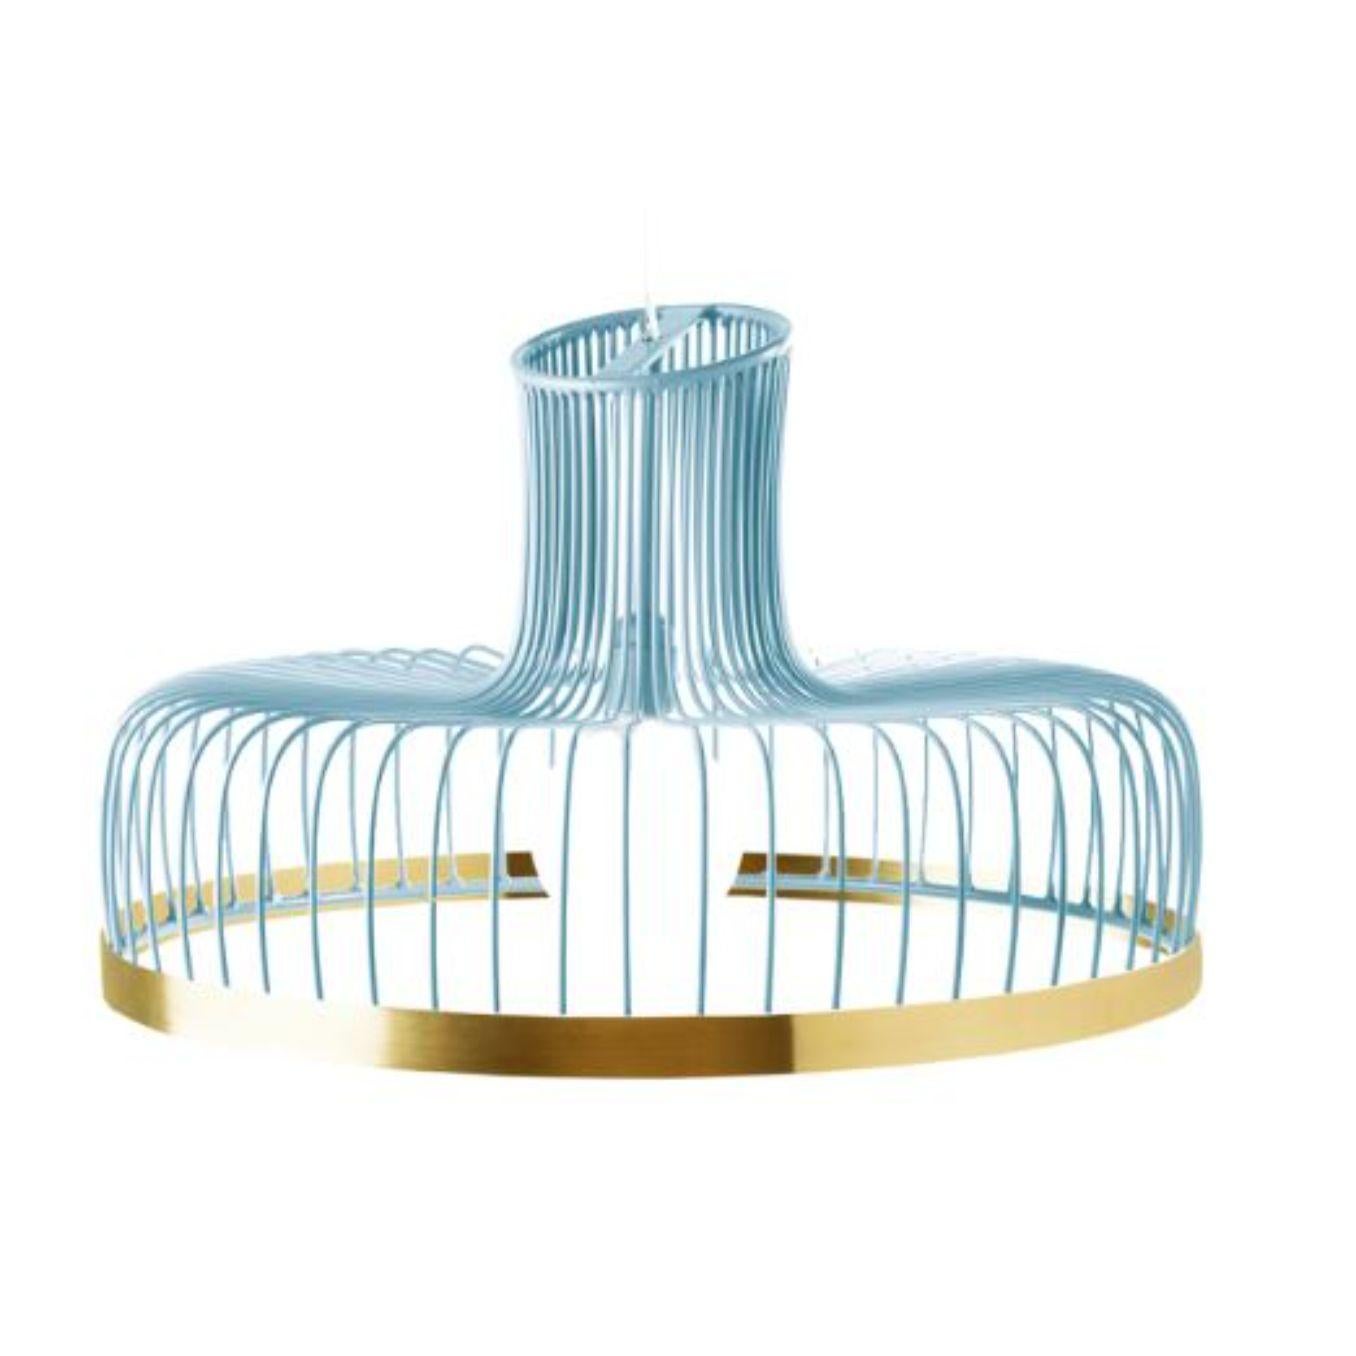 Salmon New Spider Suspension Lamp with Copper Ring by Dooq For Sale 2